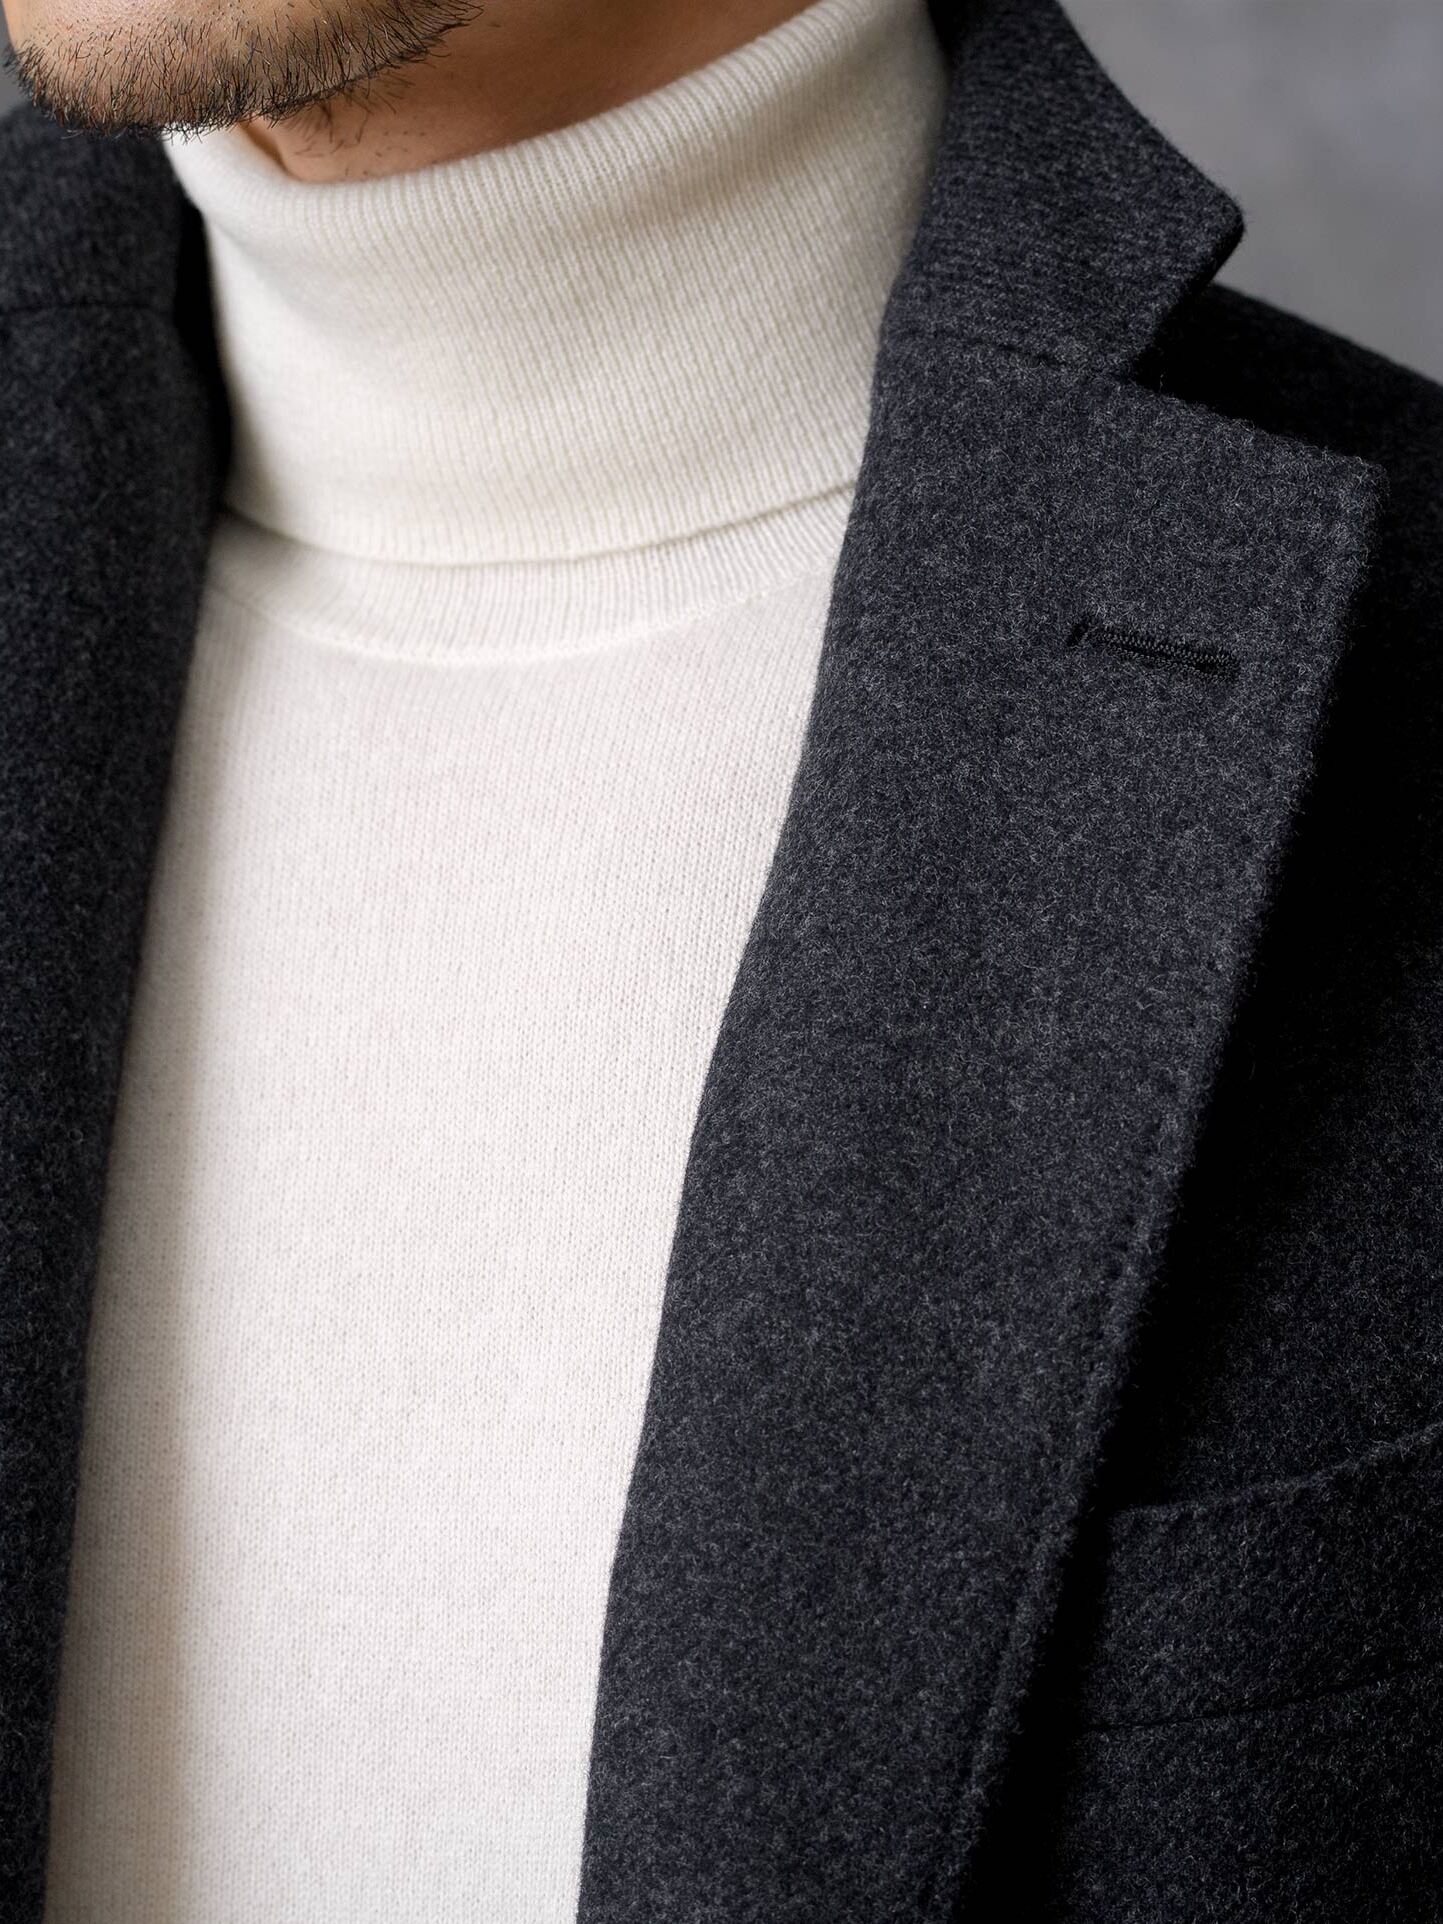 Bowery Charcoal Wool Unstructured Coat by Proper Cloth